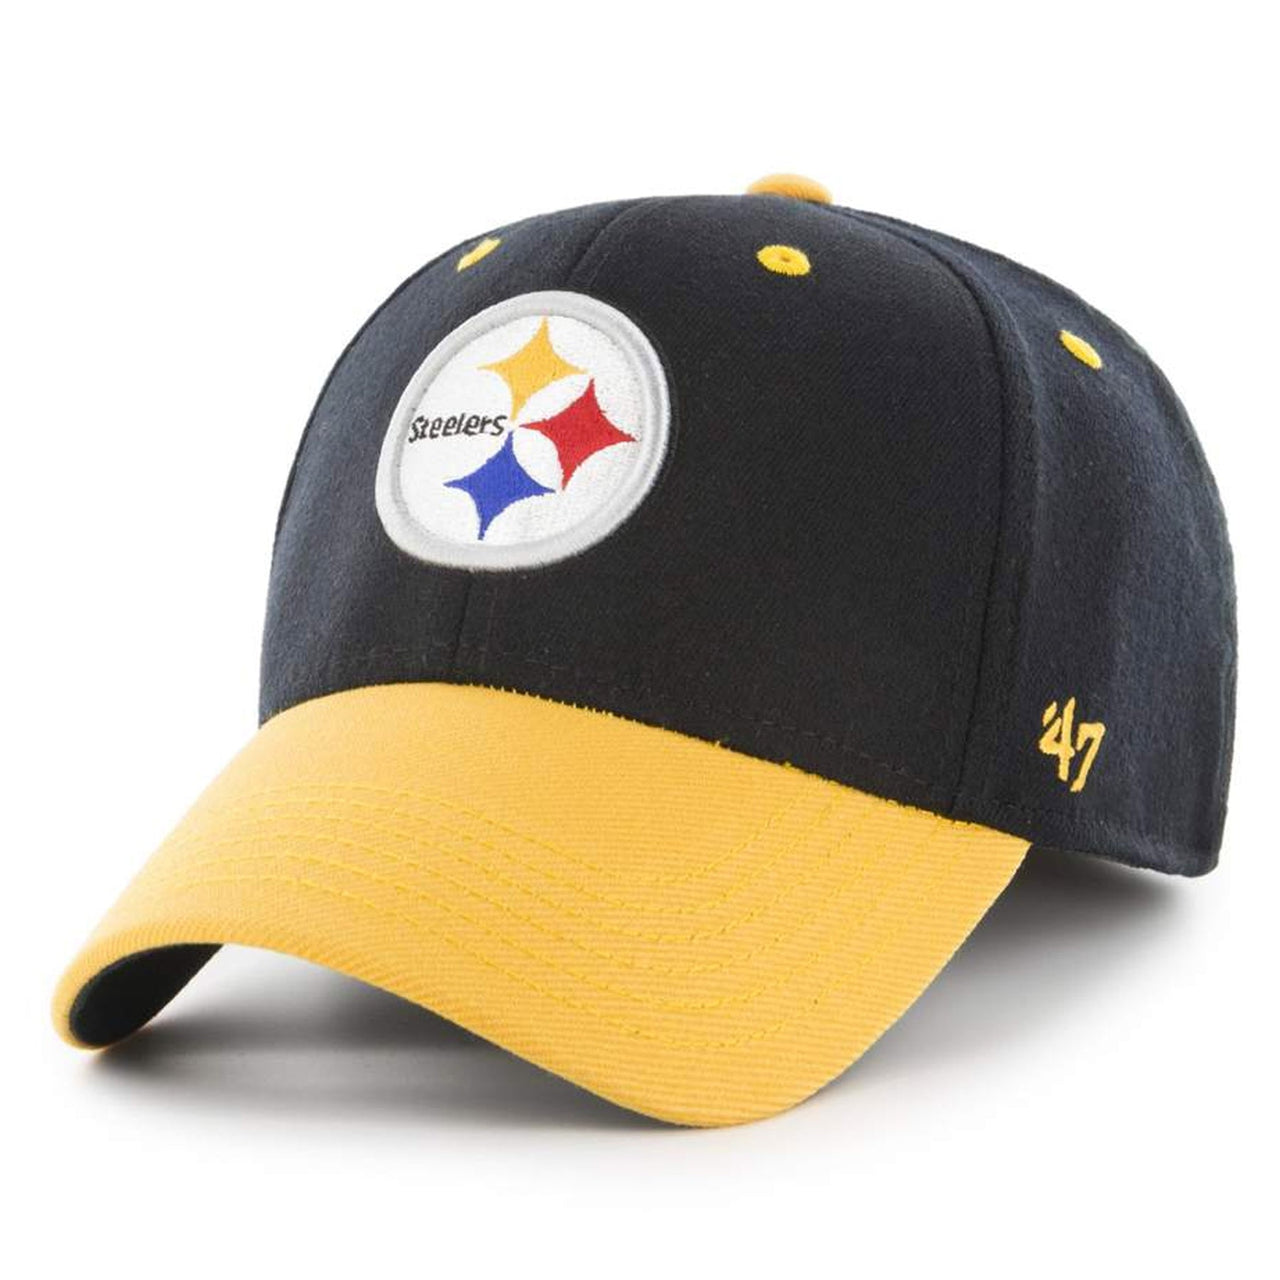 Embroidered on the front of the Pittsburgh Steelers one size fits all stretch fit cap is the Steelers logo in white, yellow, red, blue, and black